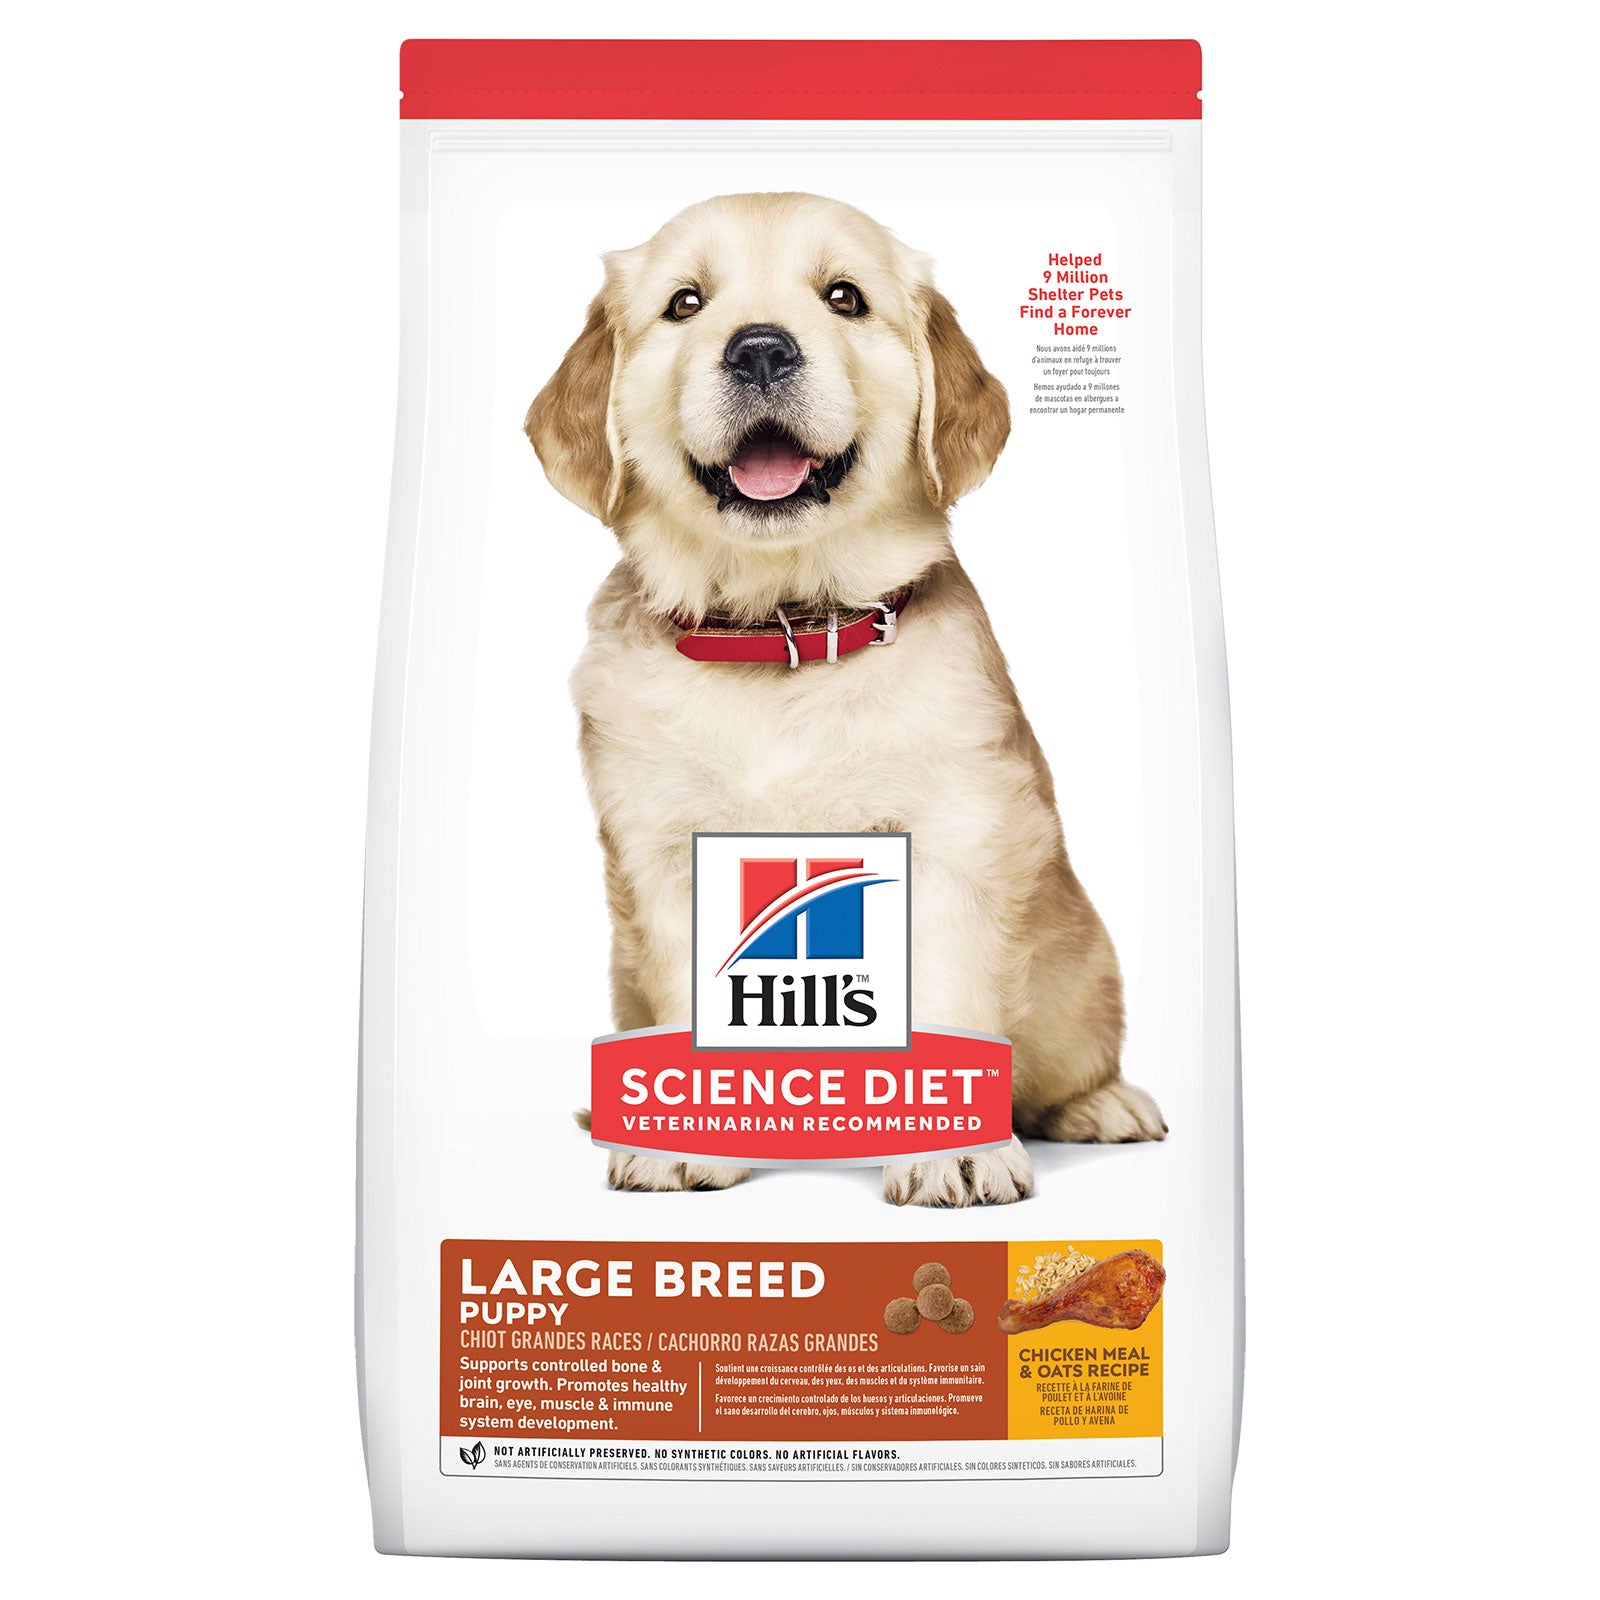 Hill's Science Diet Dog Food Puppy Large Breed